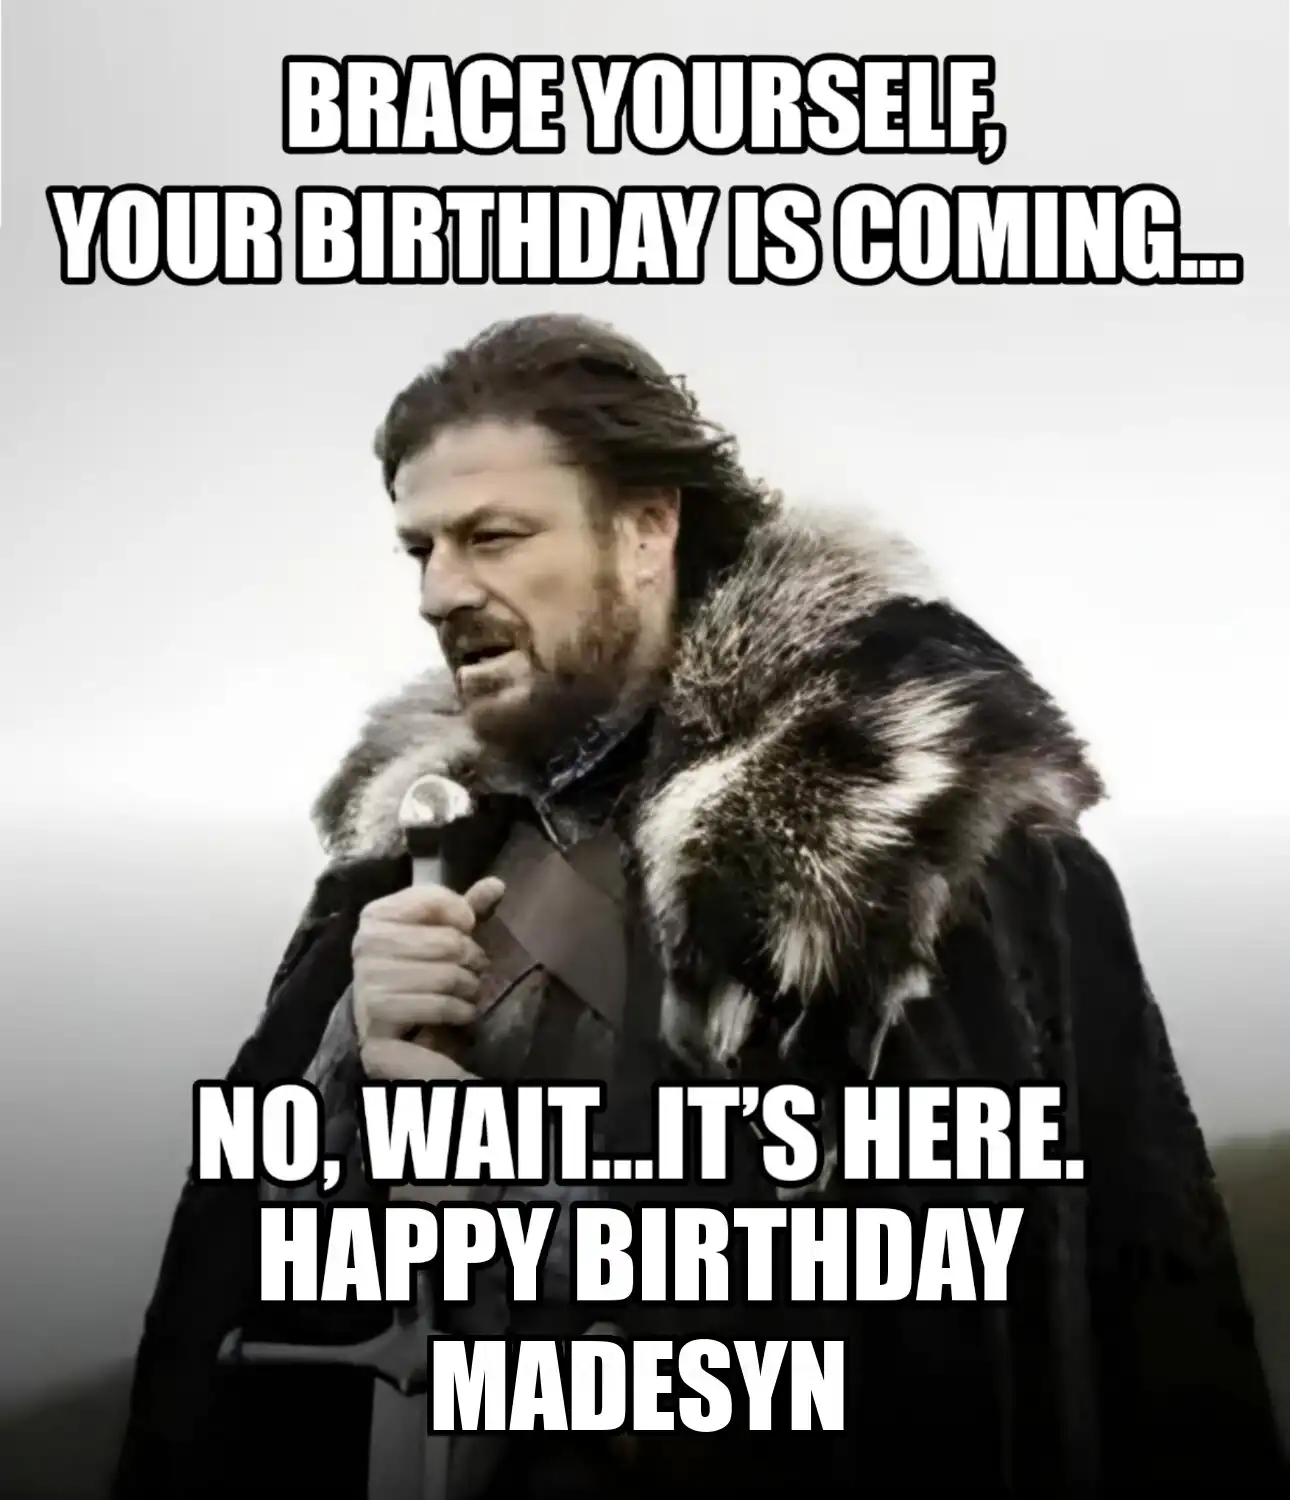 Happy Birthday Madesyn Brace Yourself Your Birthday Is Coming Meme